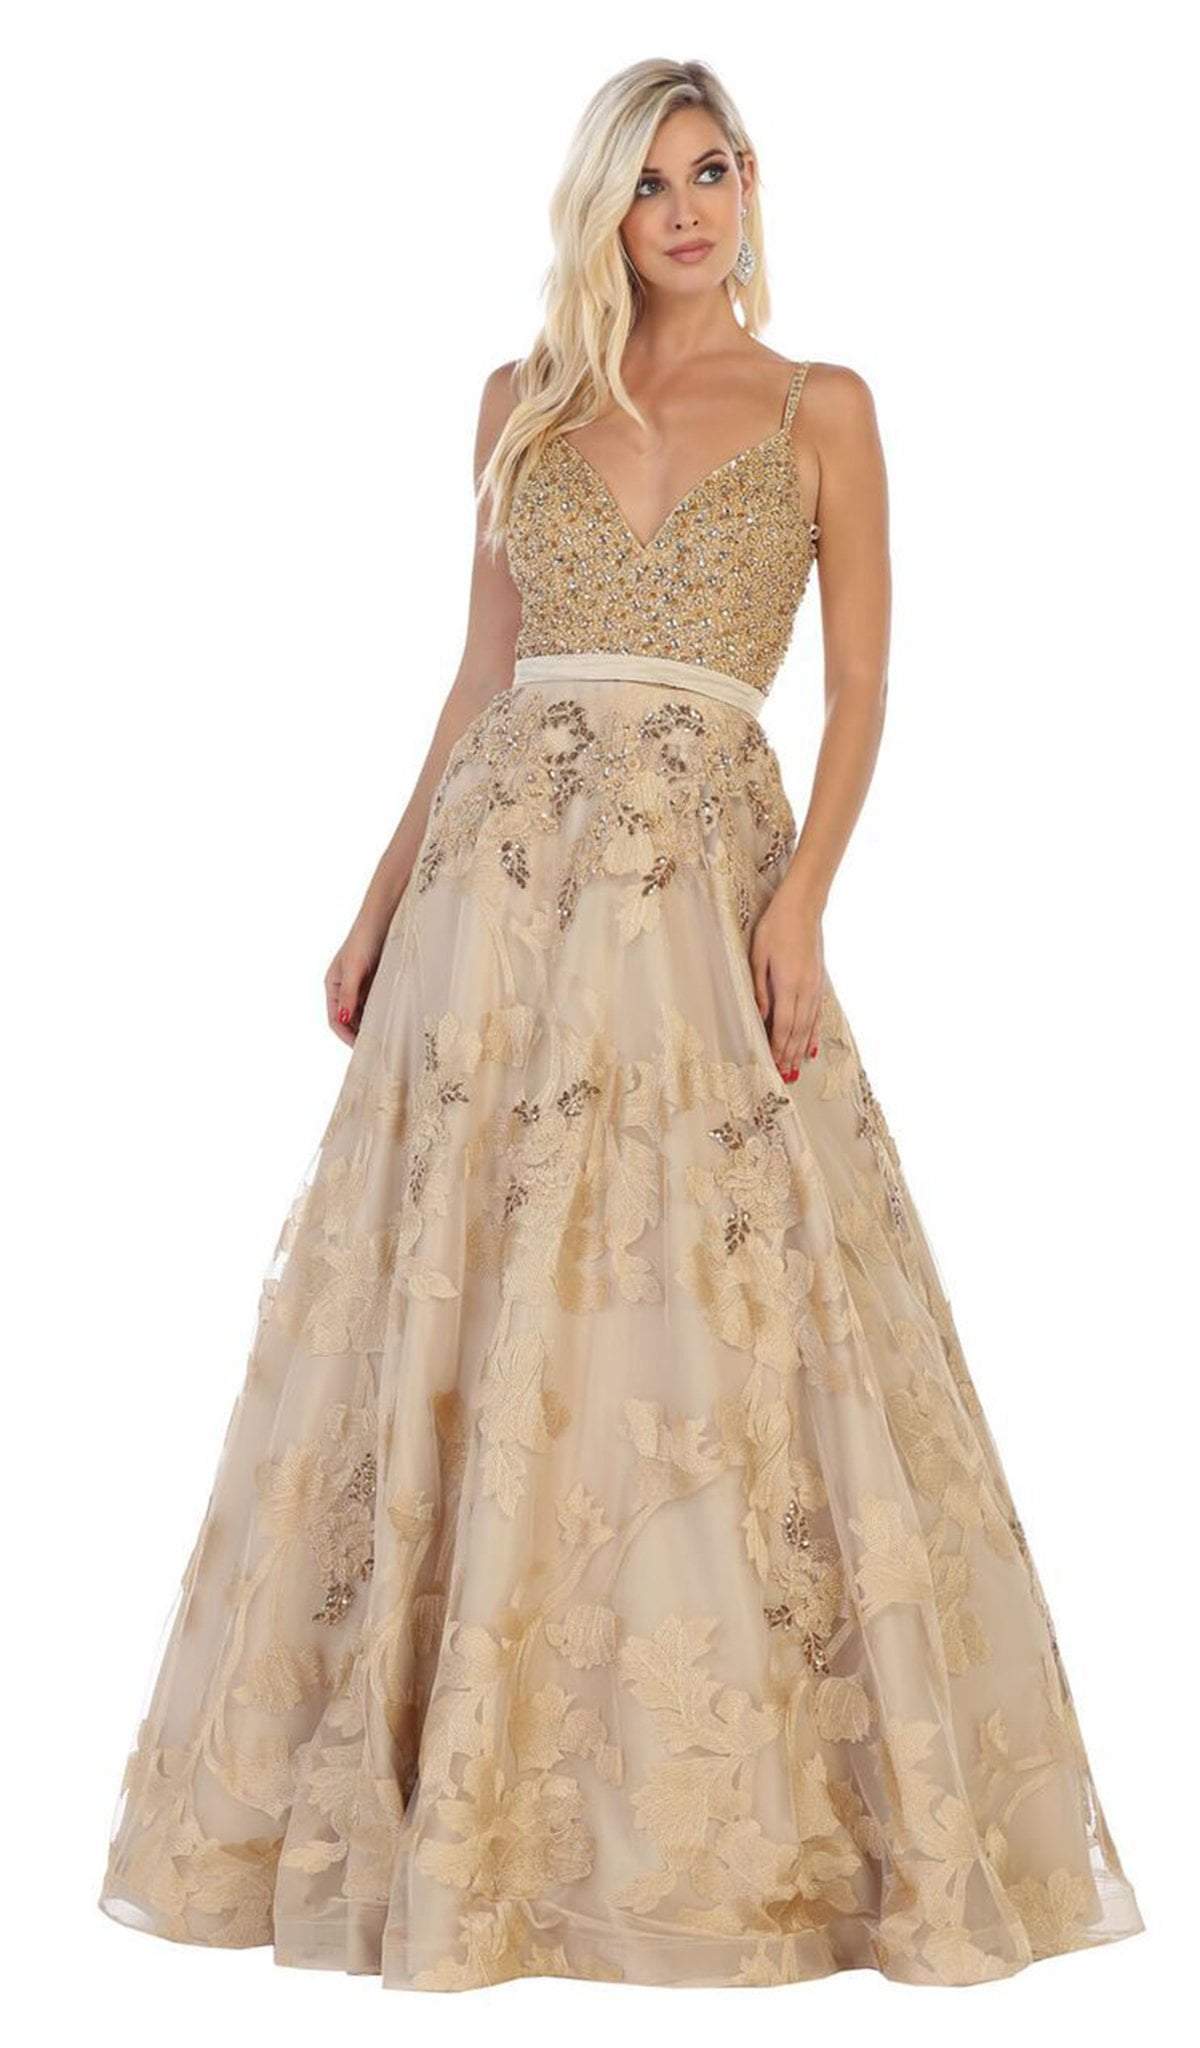 May Queen - RQ-7636 Embellished Plunging V-neck A-line Dress In Gold